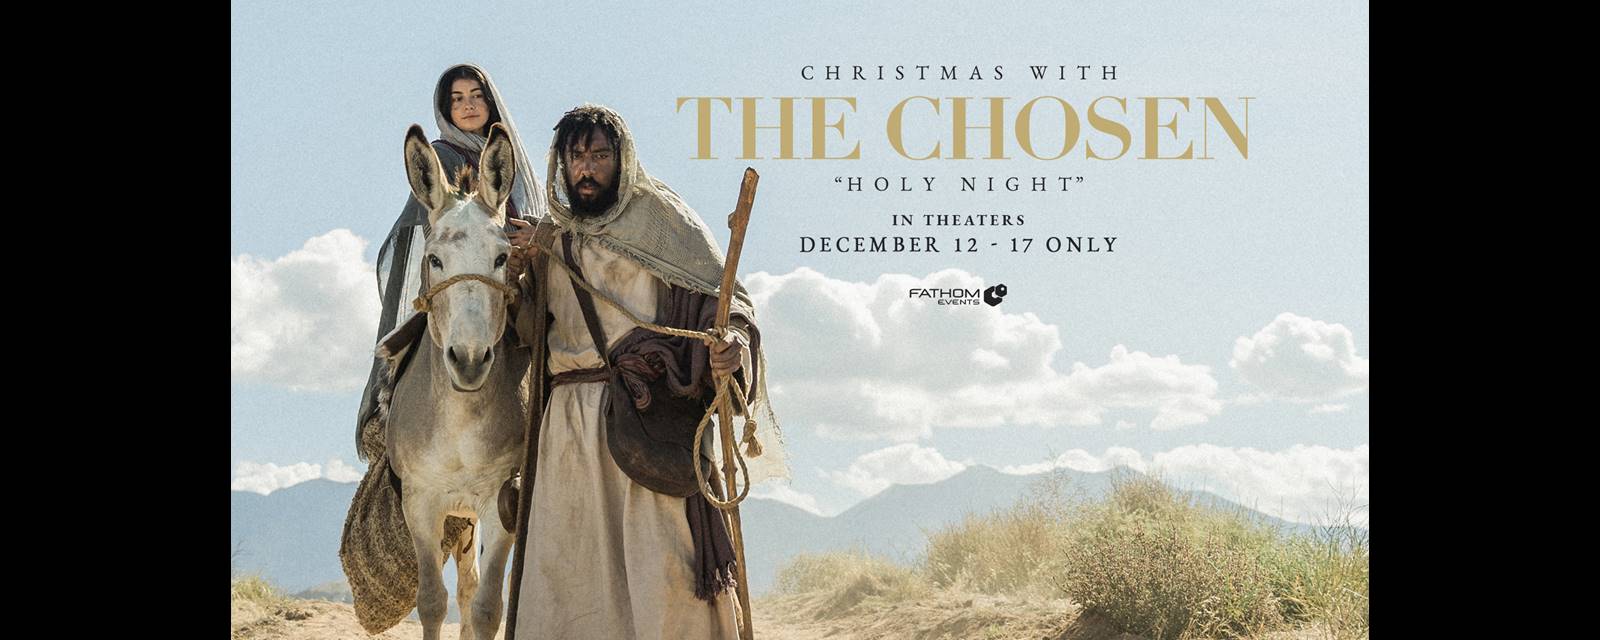 Christmas with the Chosen: Holy Night